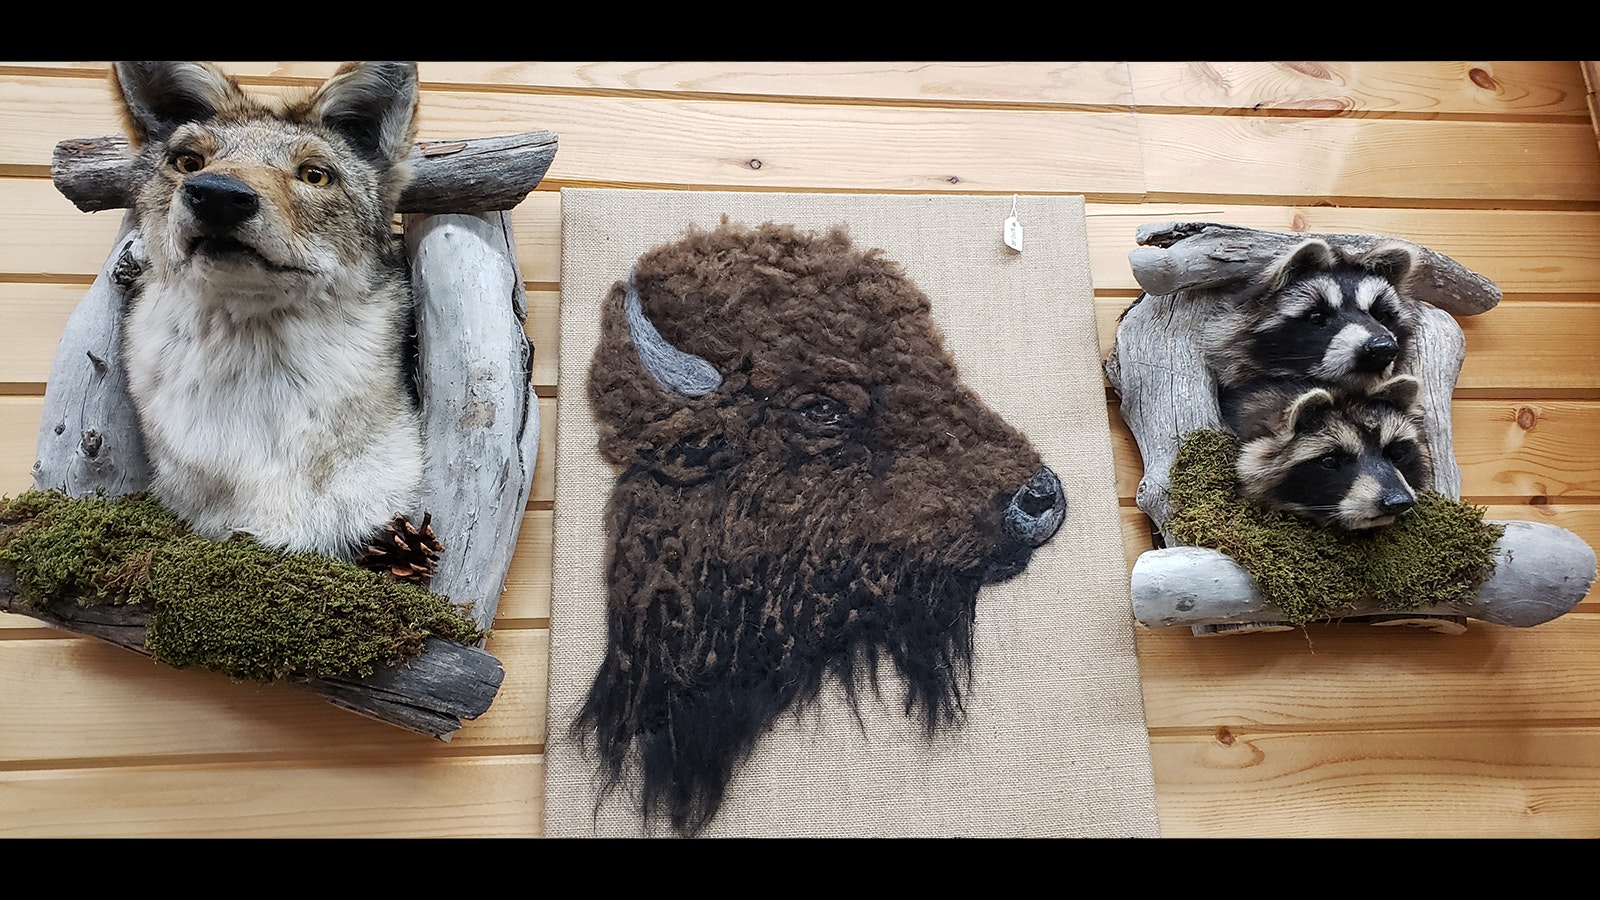 The buffalo in the center was composed using actual buffalo fur.